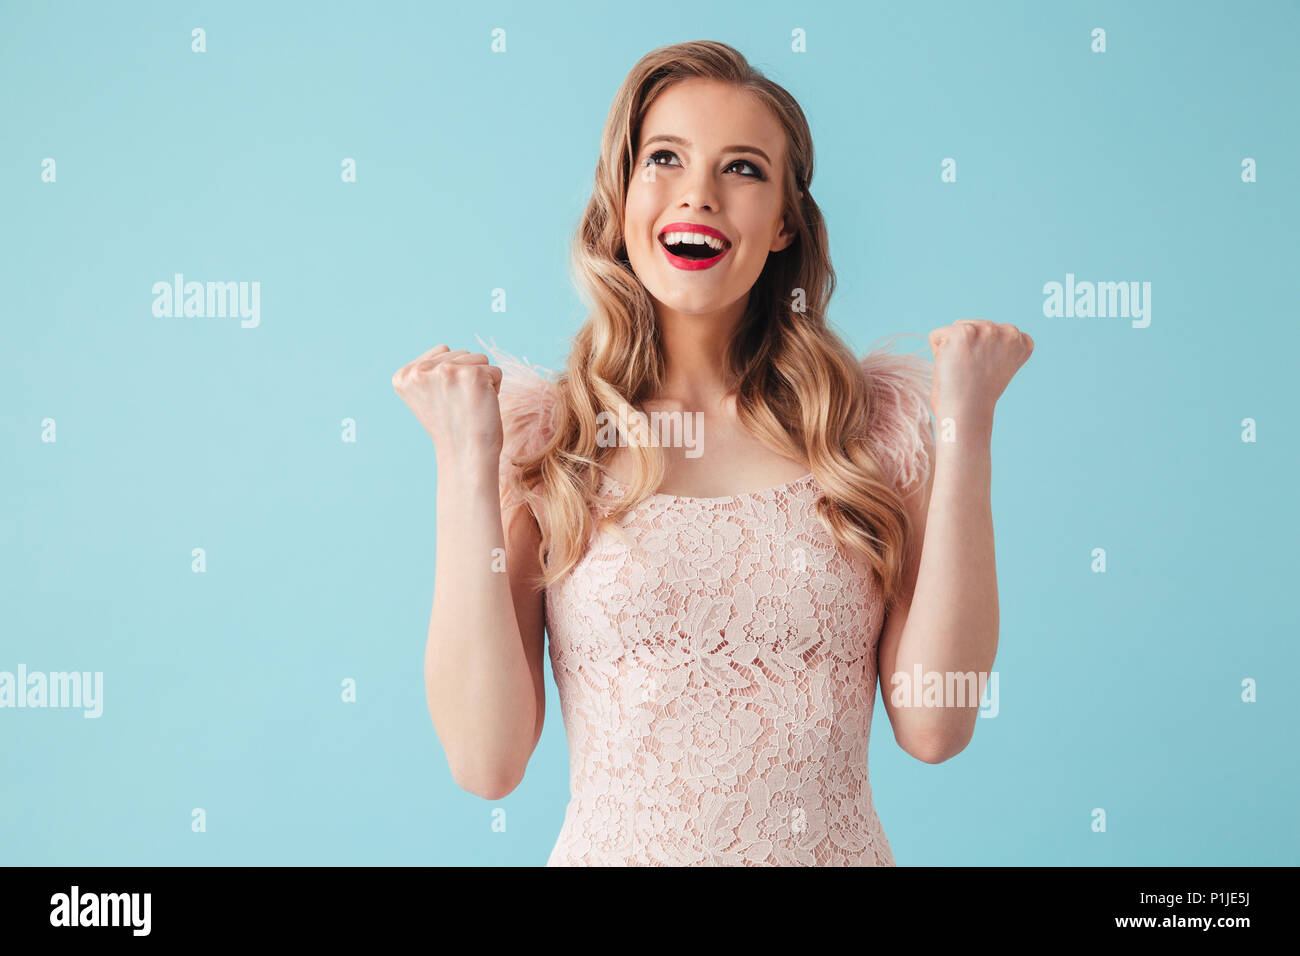 Cheerful blonde woman in dress rejoices and looking up over turquoise background Stock Photo